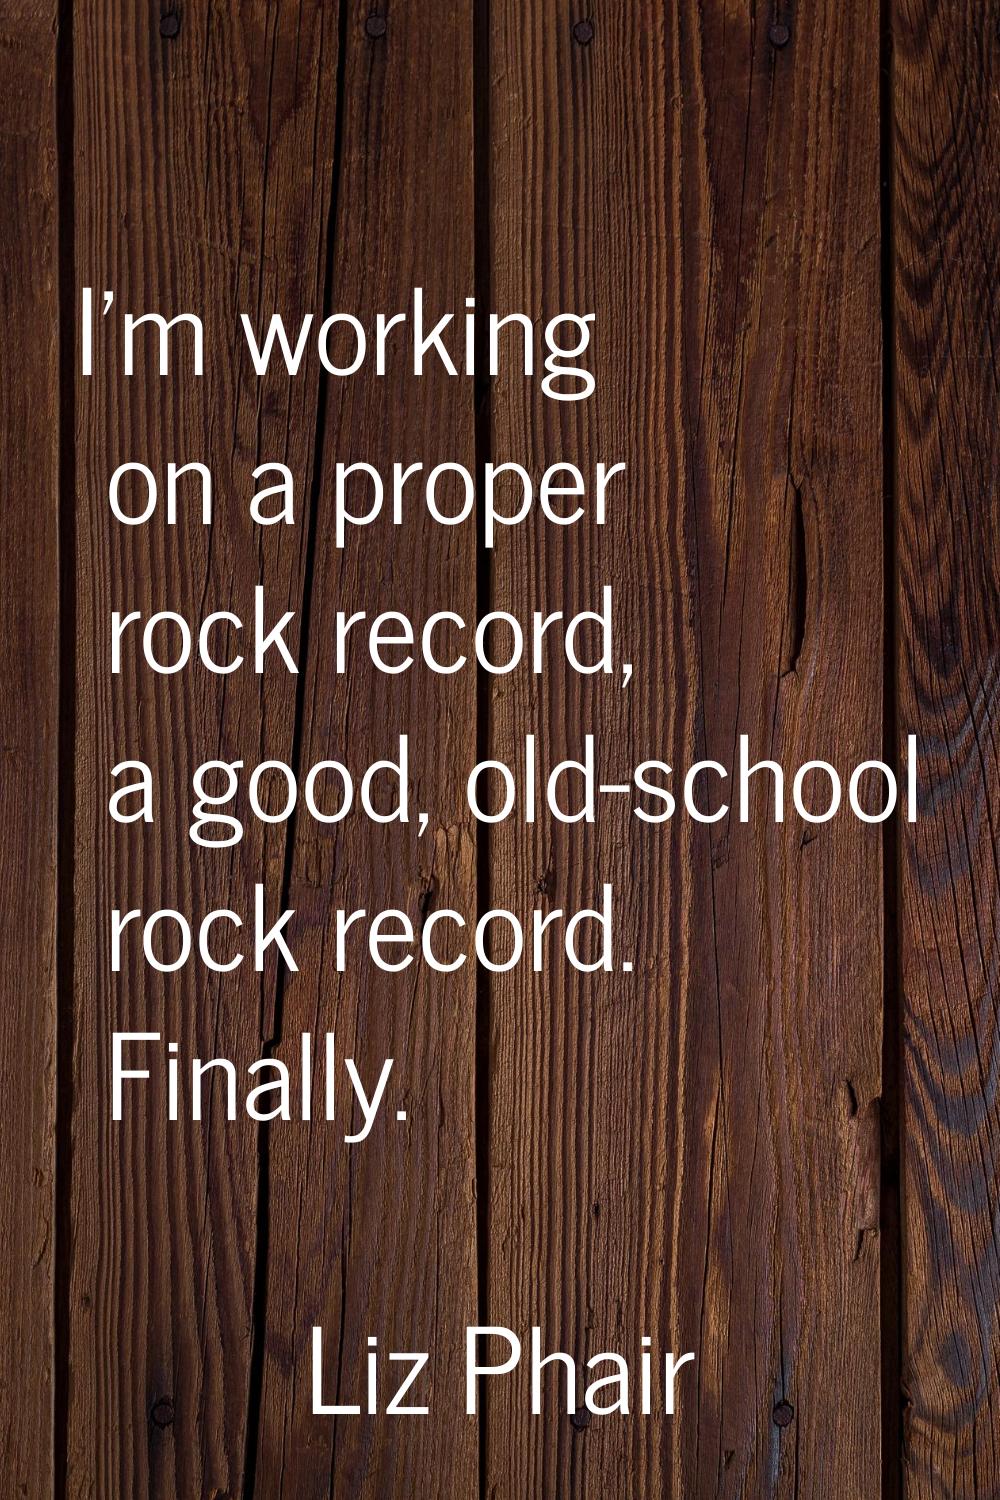 I'm working on a proper rock record, a good, old-school rock record. Finally.